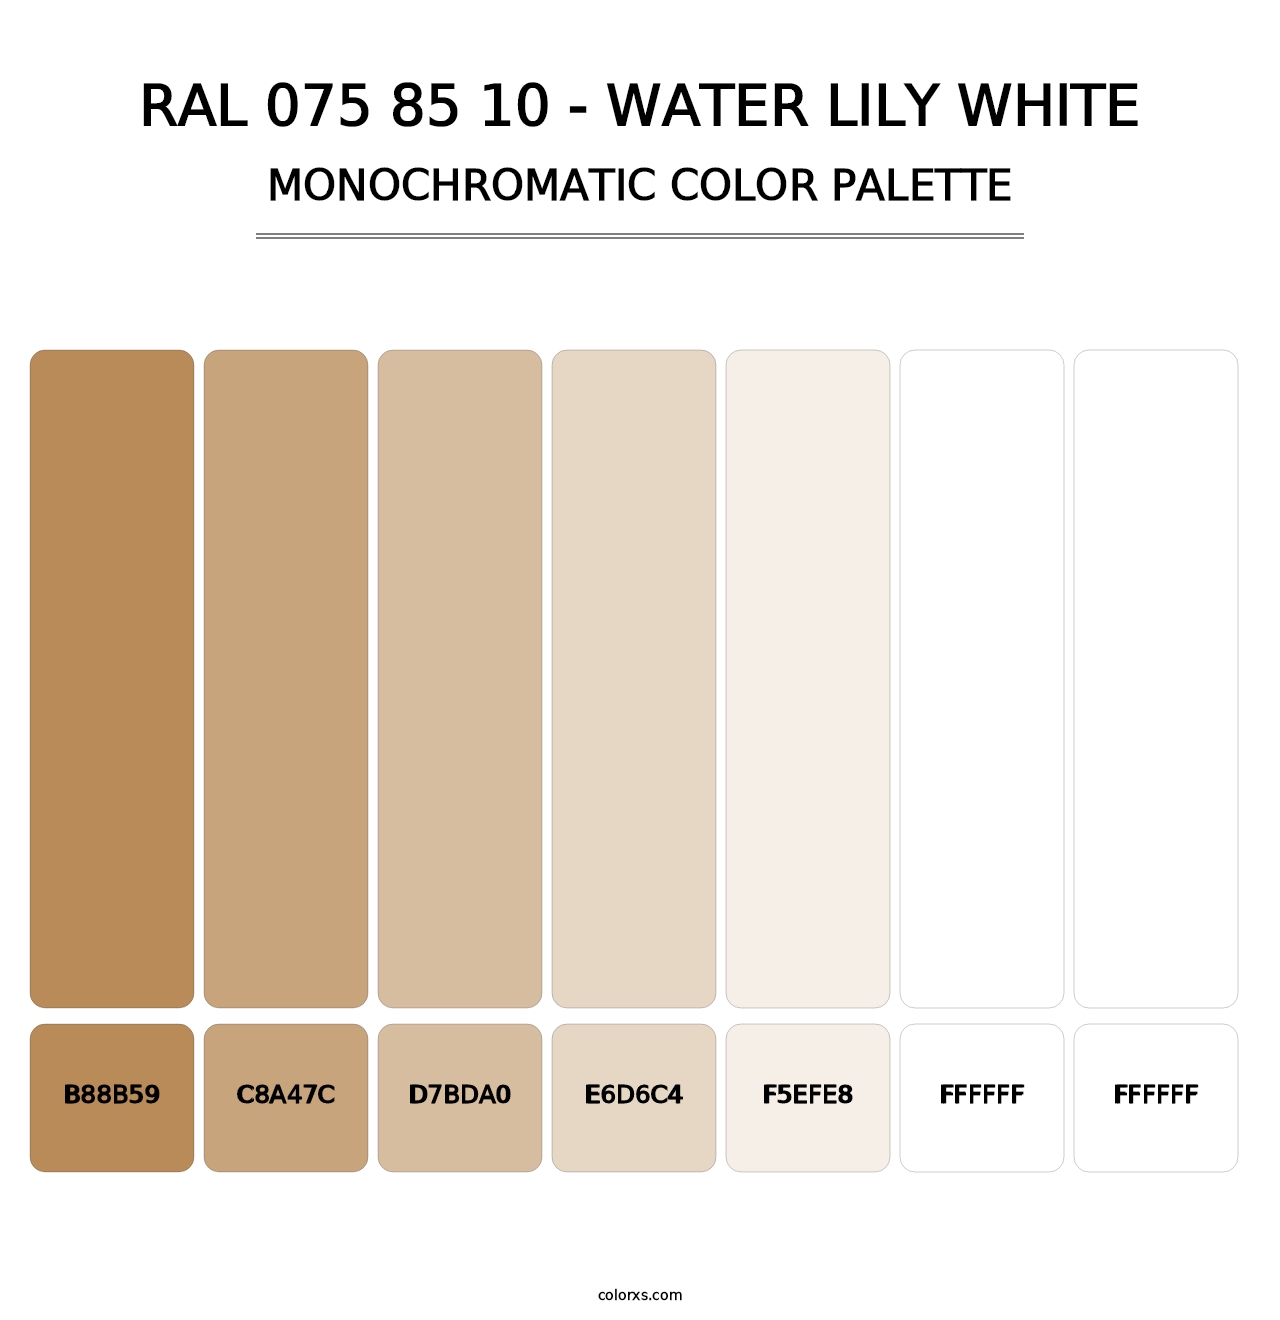 RAL 075 85 10 - Water Lily White - Monochromatic Color Palette